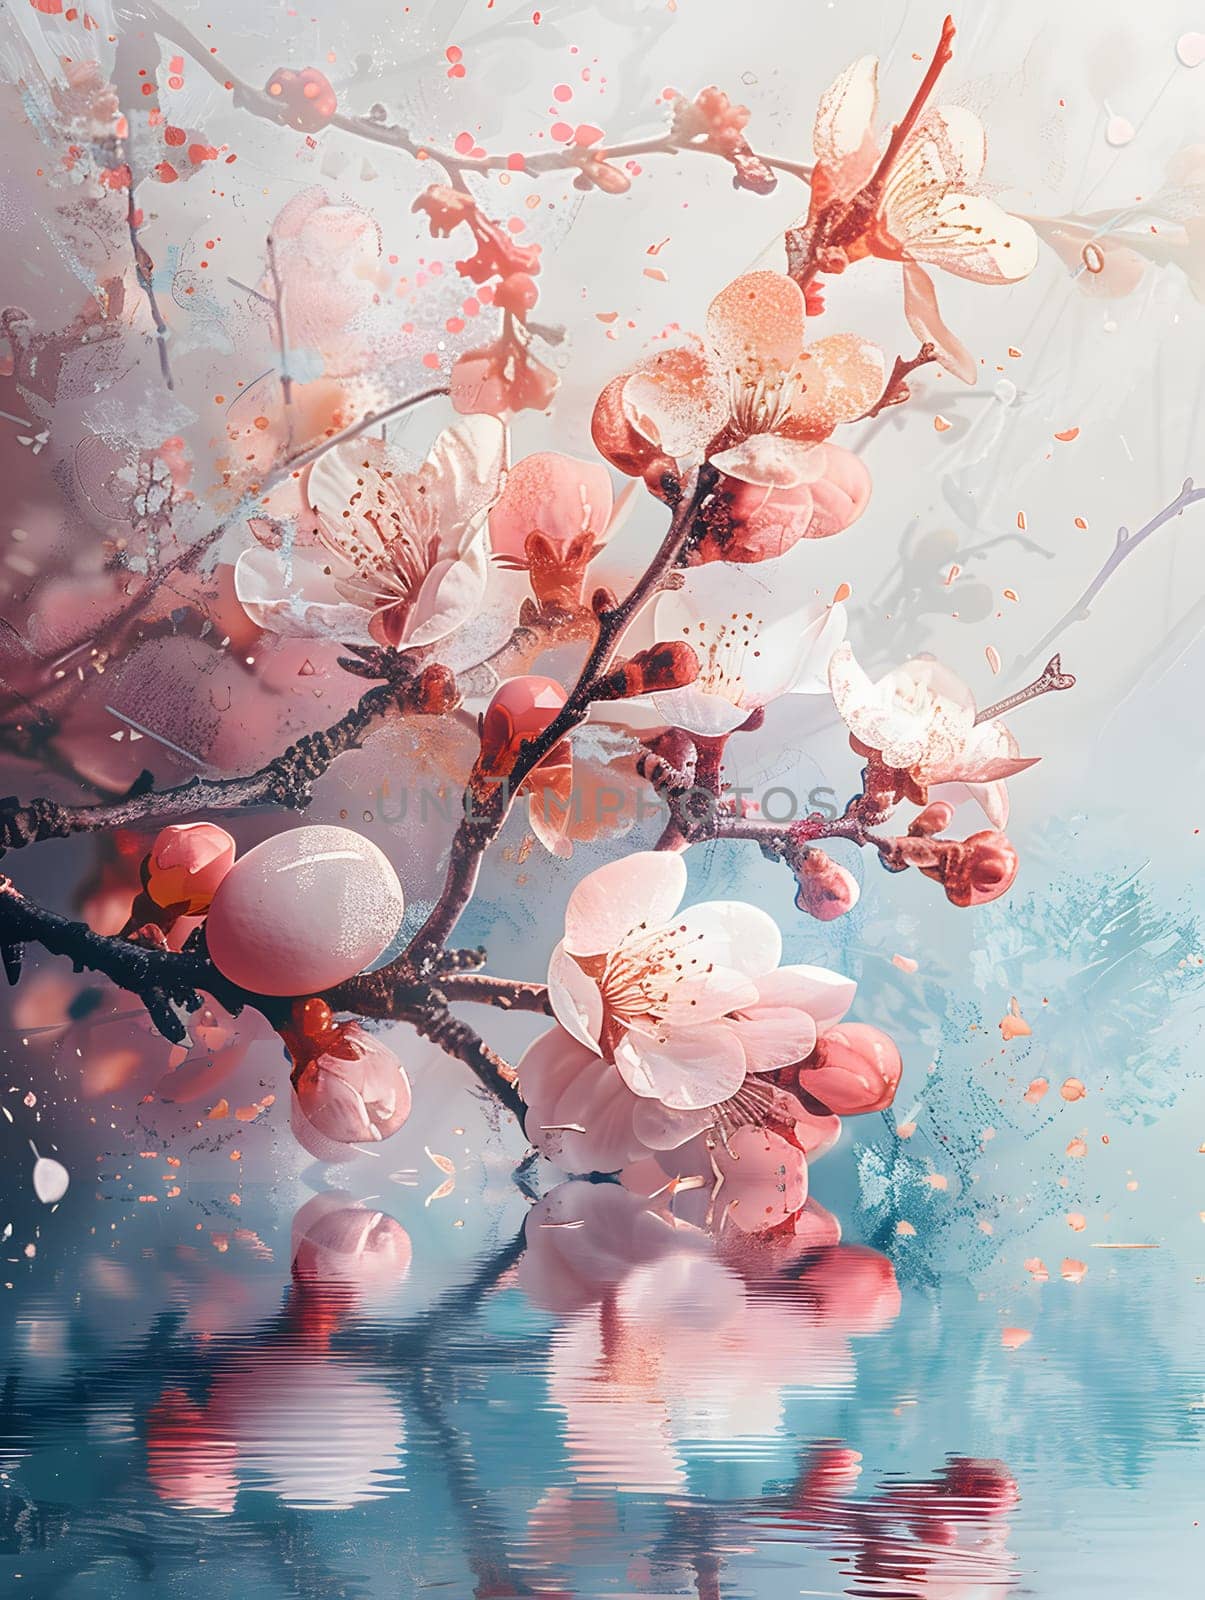 An art piece depicting a flowering cherry blossom tree with a mix of pink and white petals, showcasing the beautiful tints and shades of nature